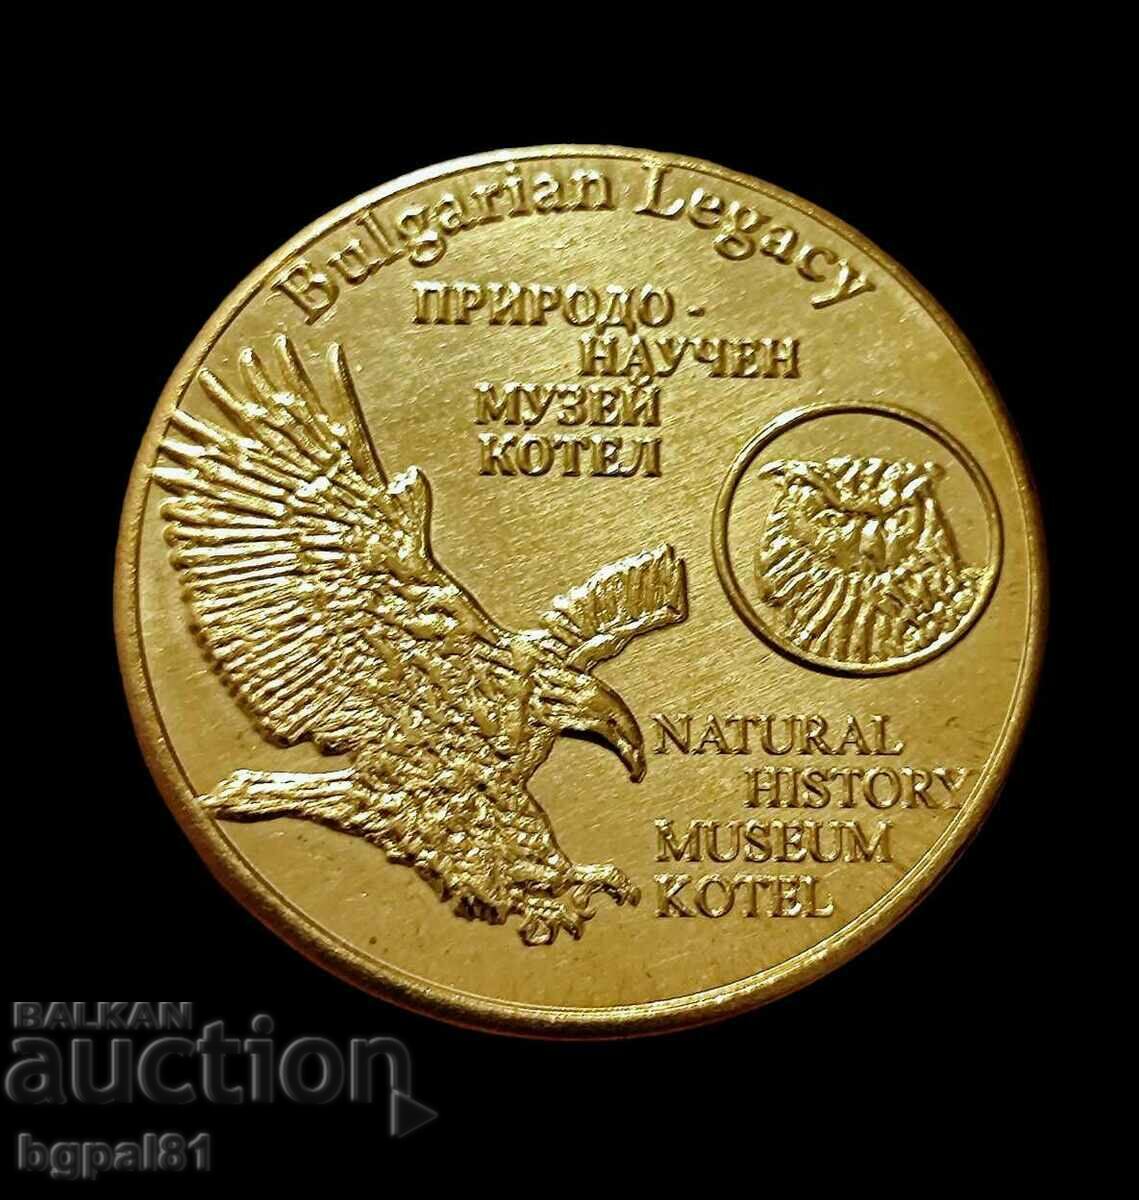 Natural History Museum Kotel - Medal issue "Bulgarian legacy